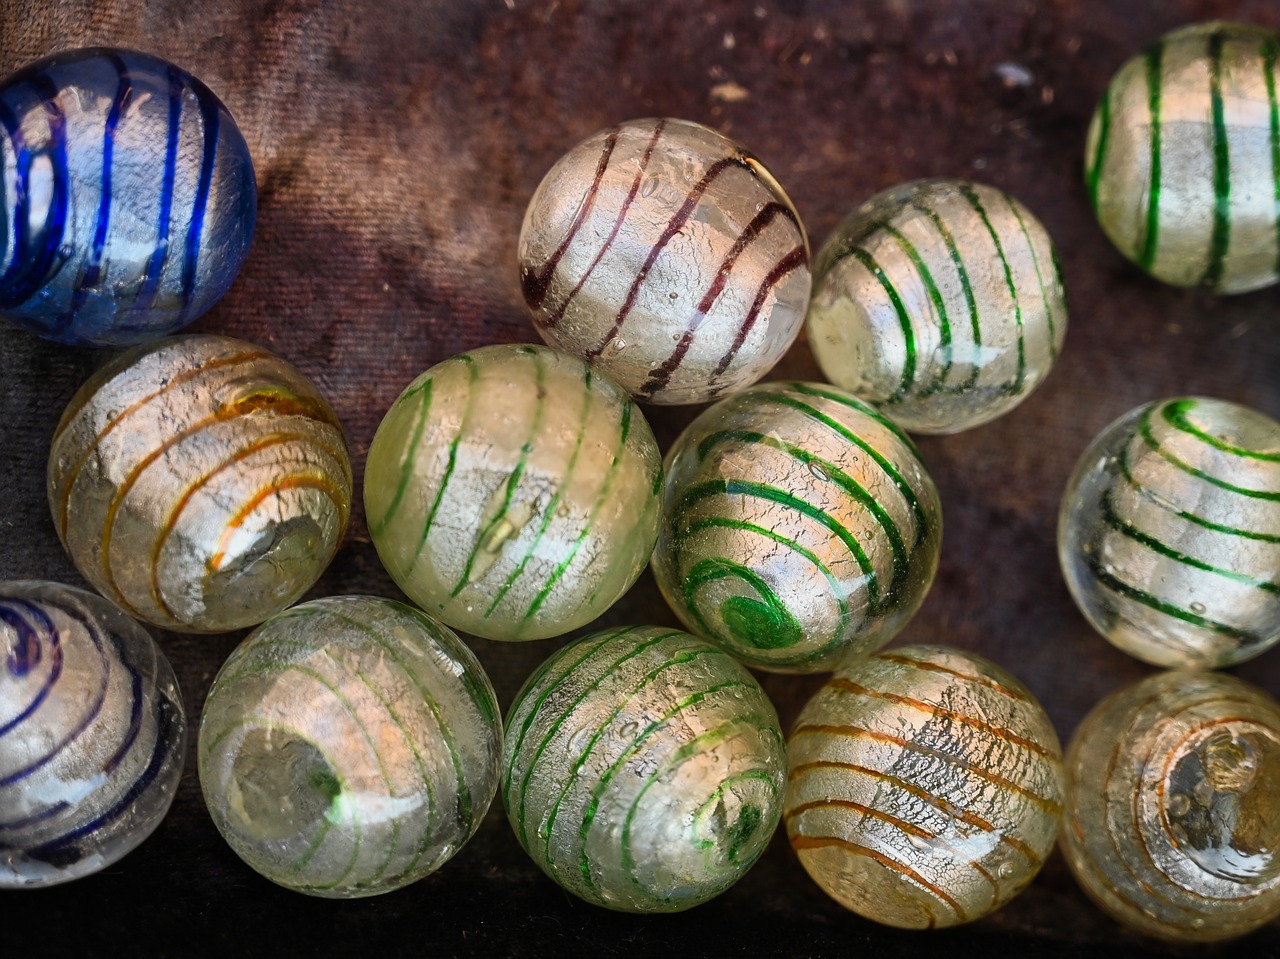 Download Free Photo Of Marbles Glaskugeln Balls Round Glass Marbles From